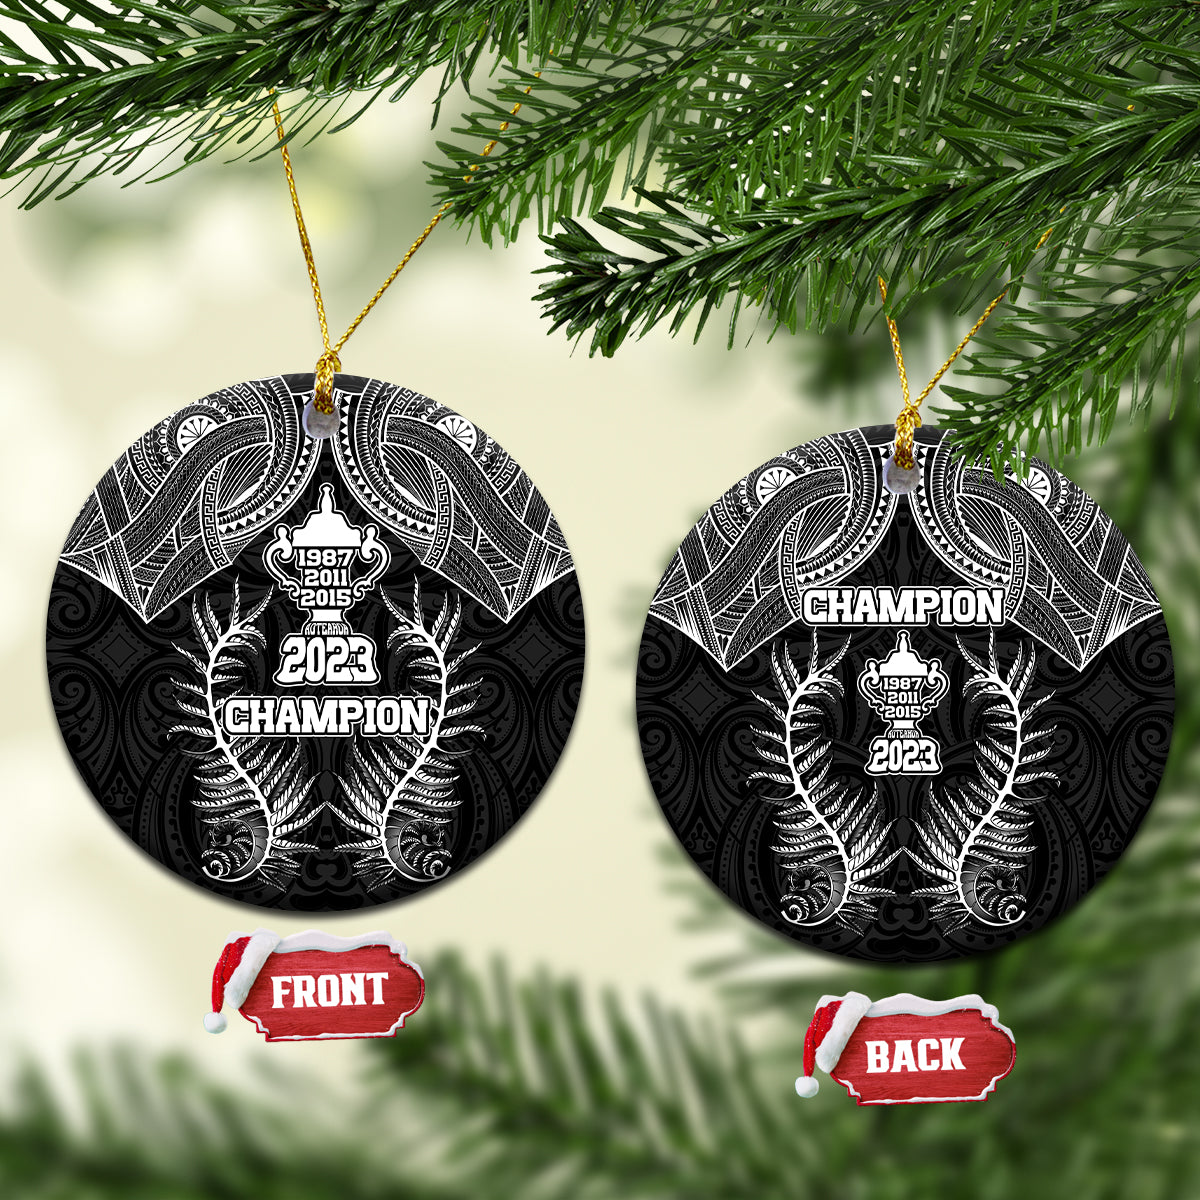 New Zealand Rugby Ceramic Ornament Aotearoa Champion Cup History with Silver Fern LT03 Circle Black - Polynesian Pride